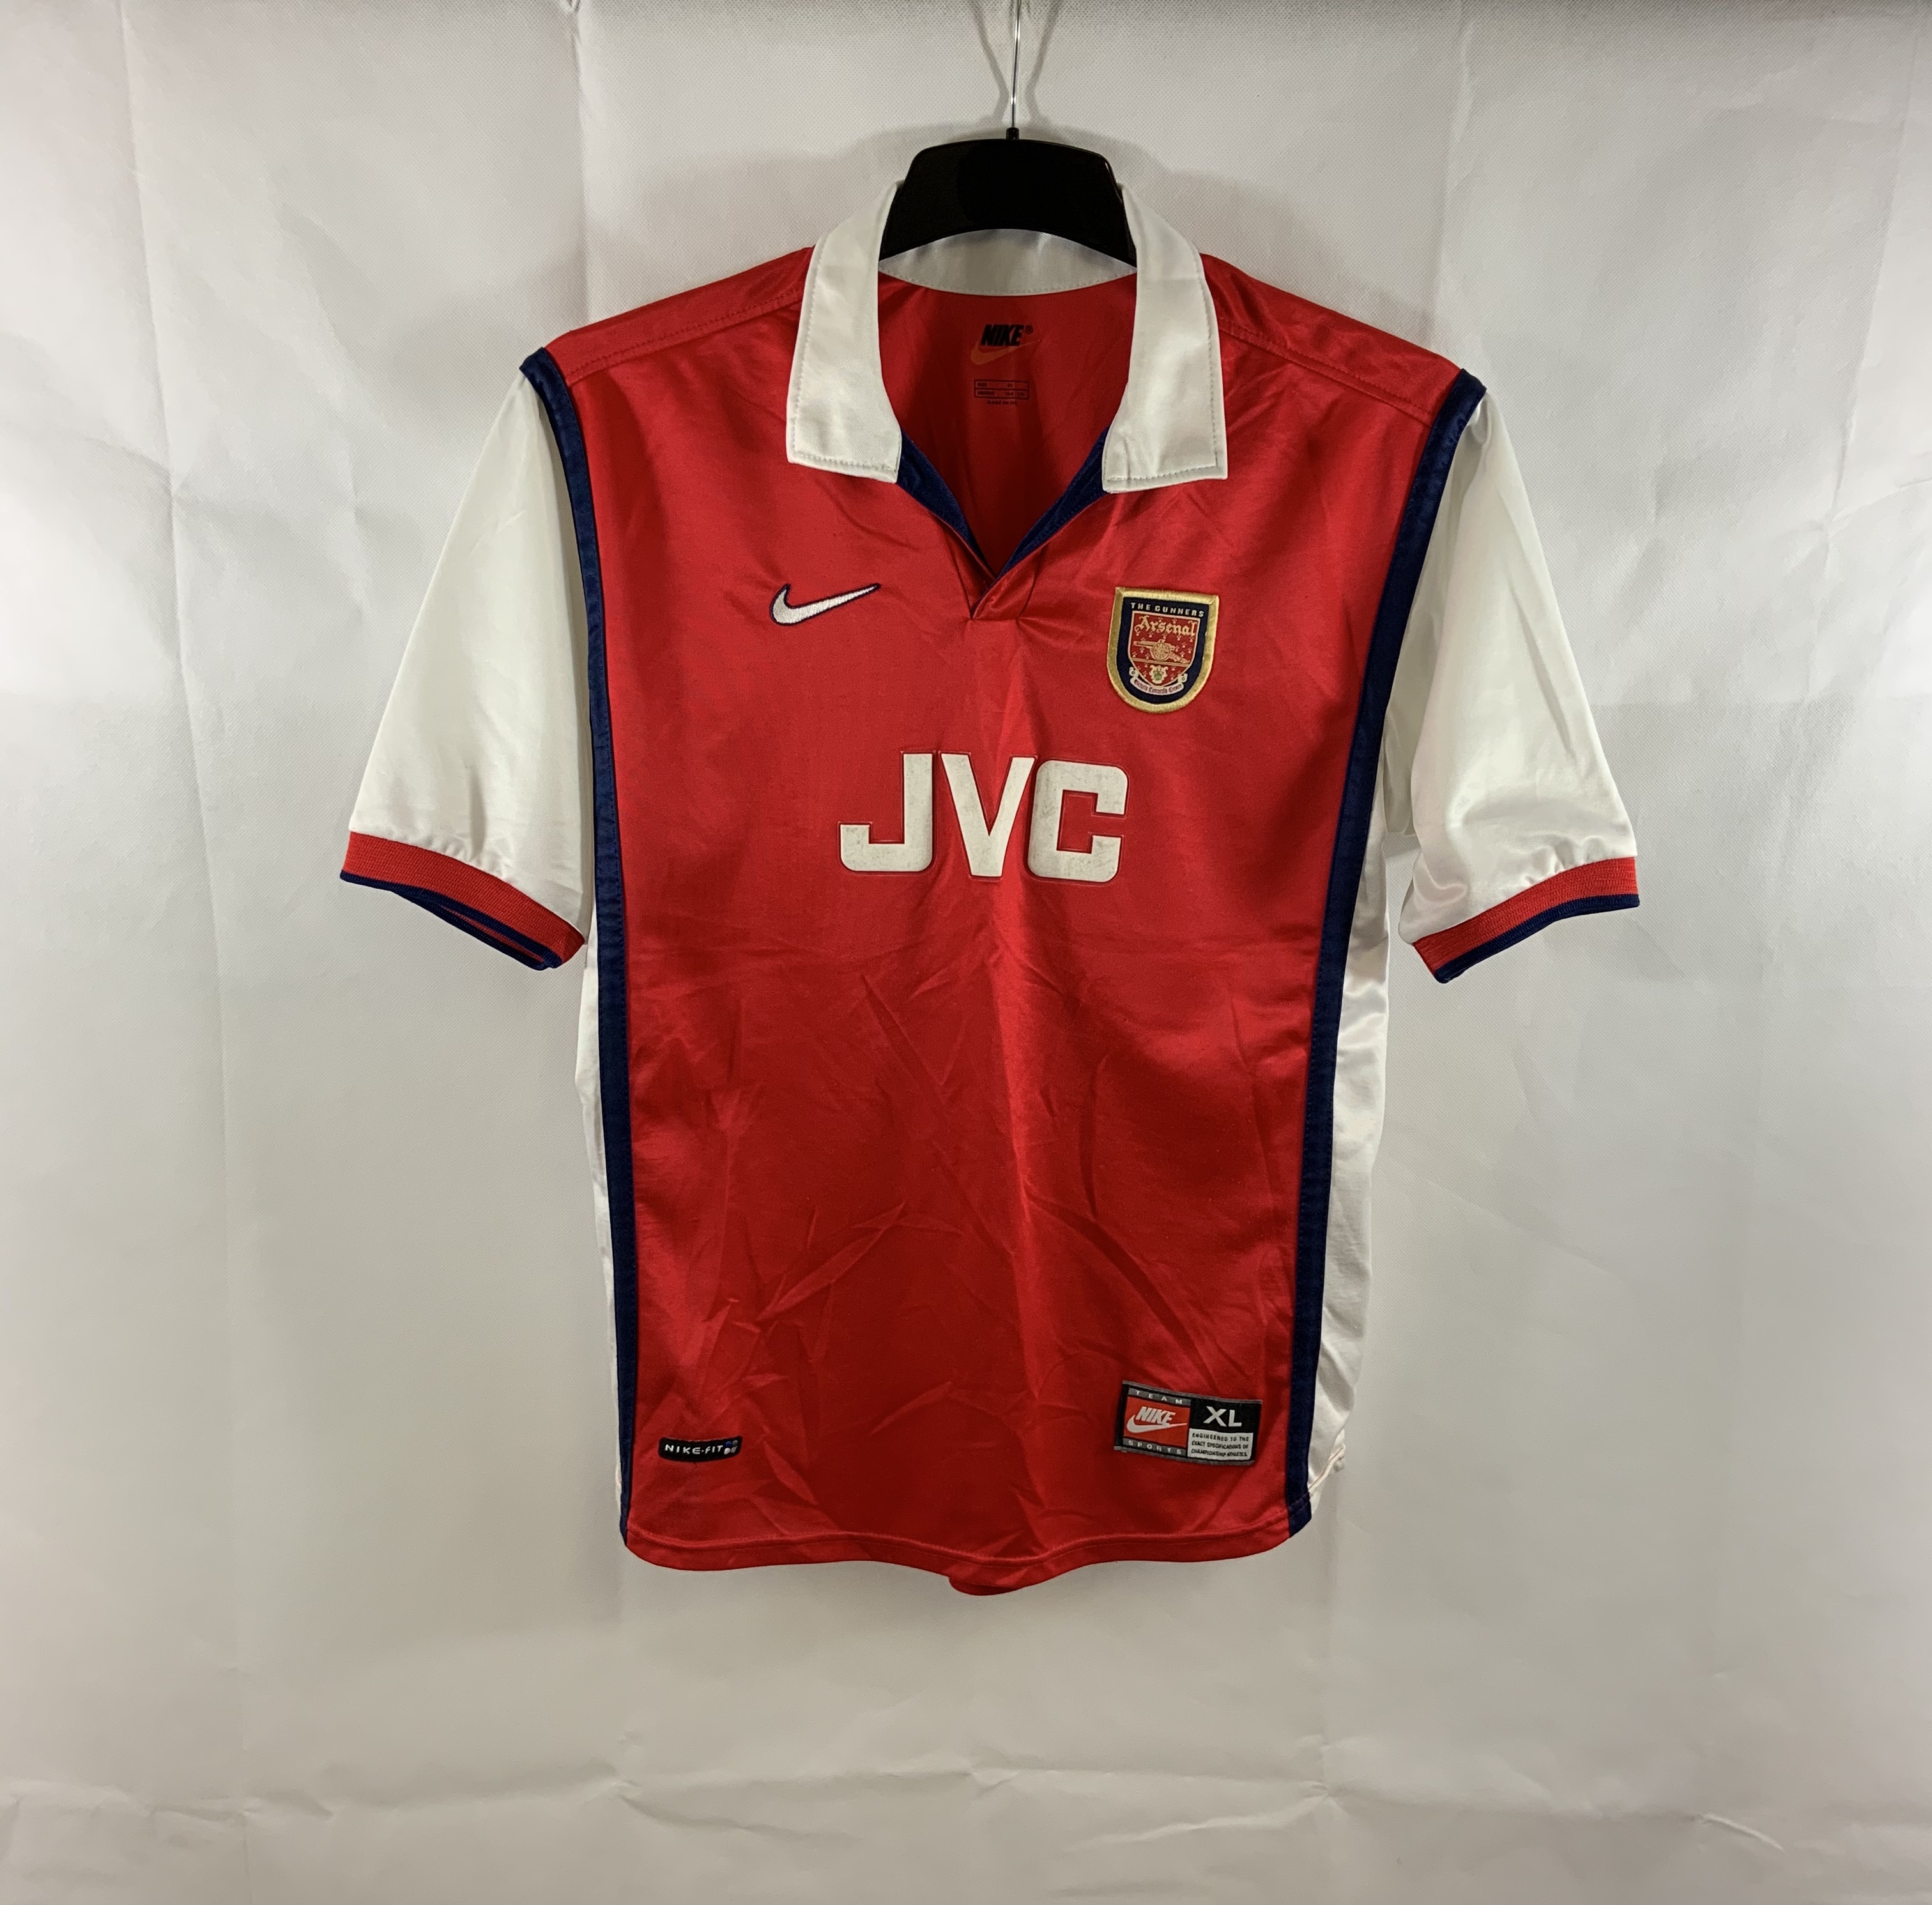 Retro Arsenal Home Jersey 1998/99 By Nike